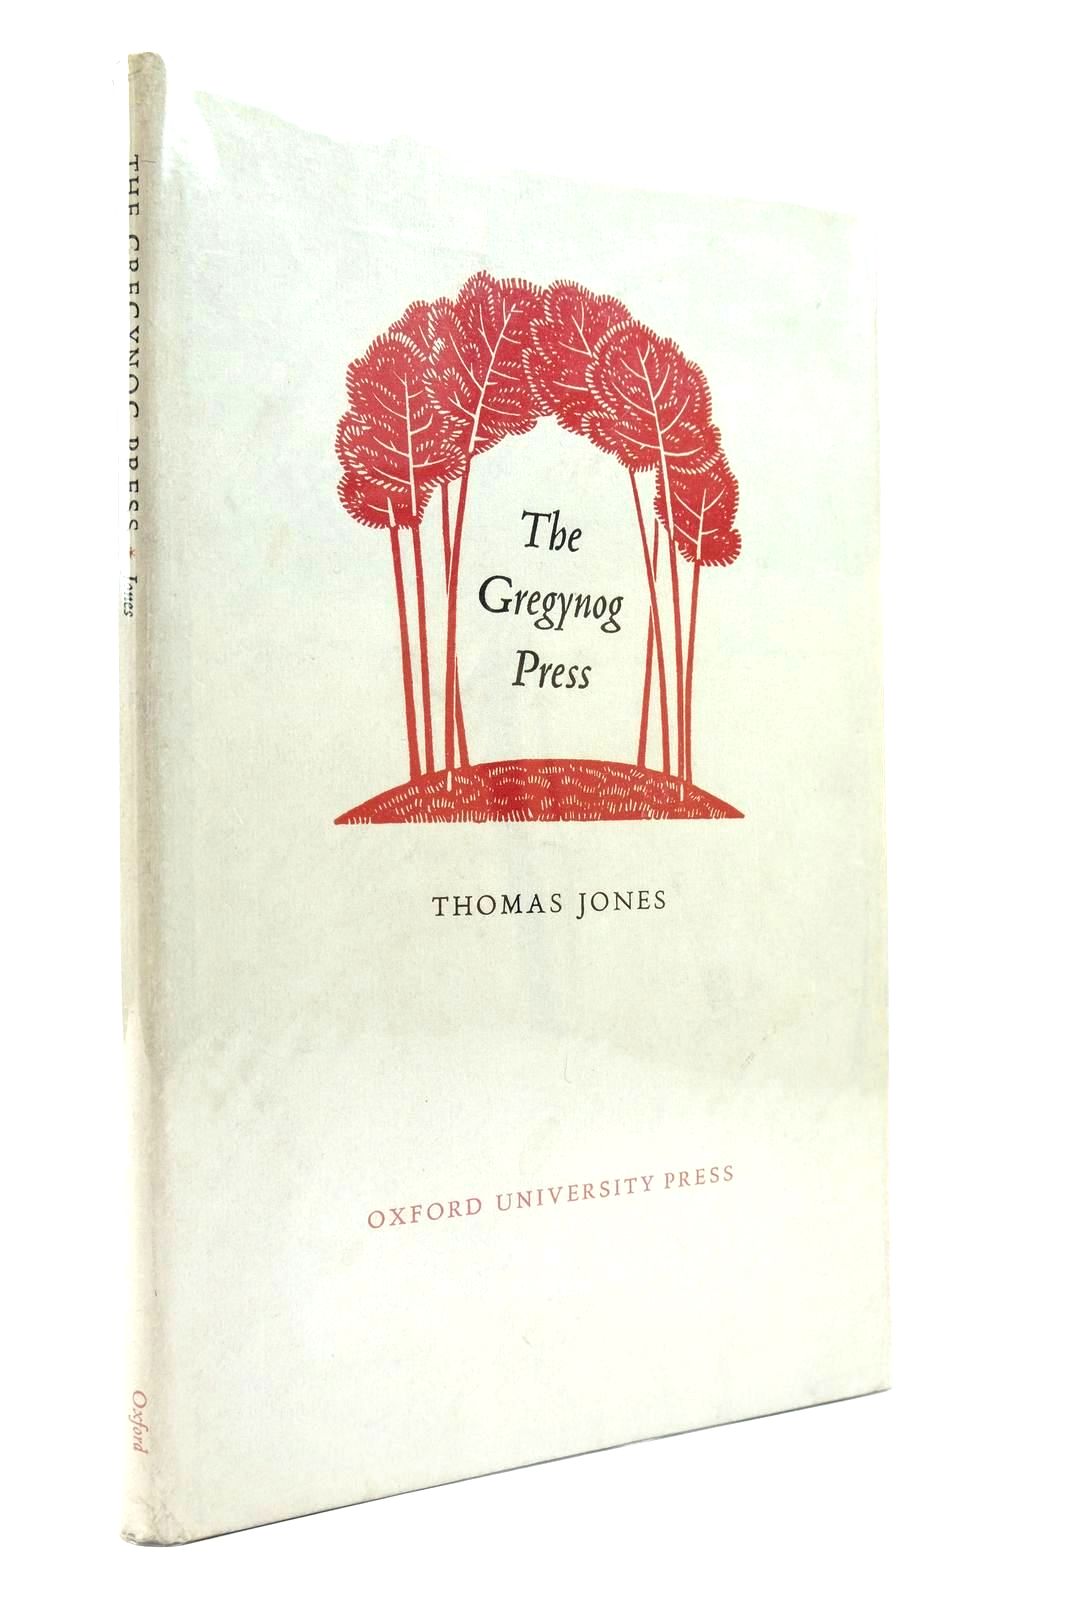 Photo of THE GREGYNOG PRESS written by Jones, Thomas published by Geoffrey Cumberlege, Oxford University Press (STOCK CODE: 2139296)  for sale by Stella & Rose's Books